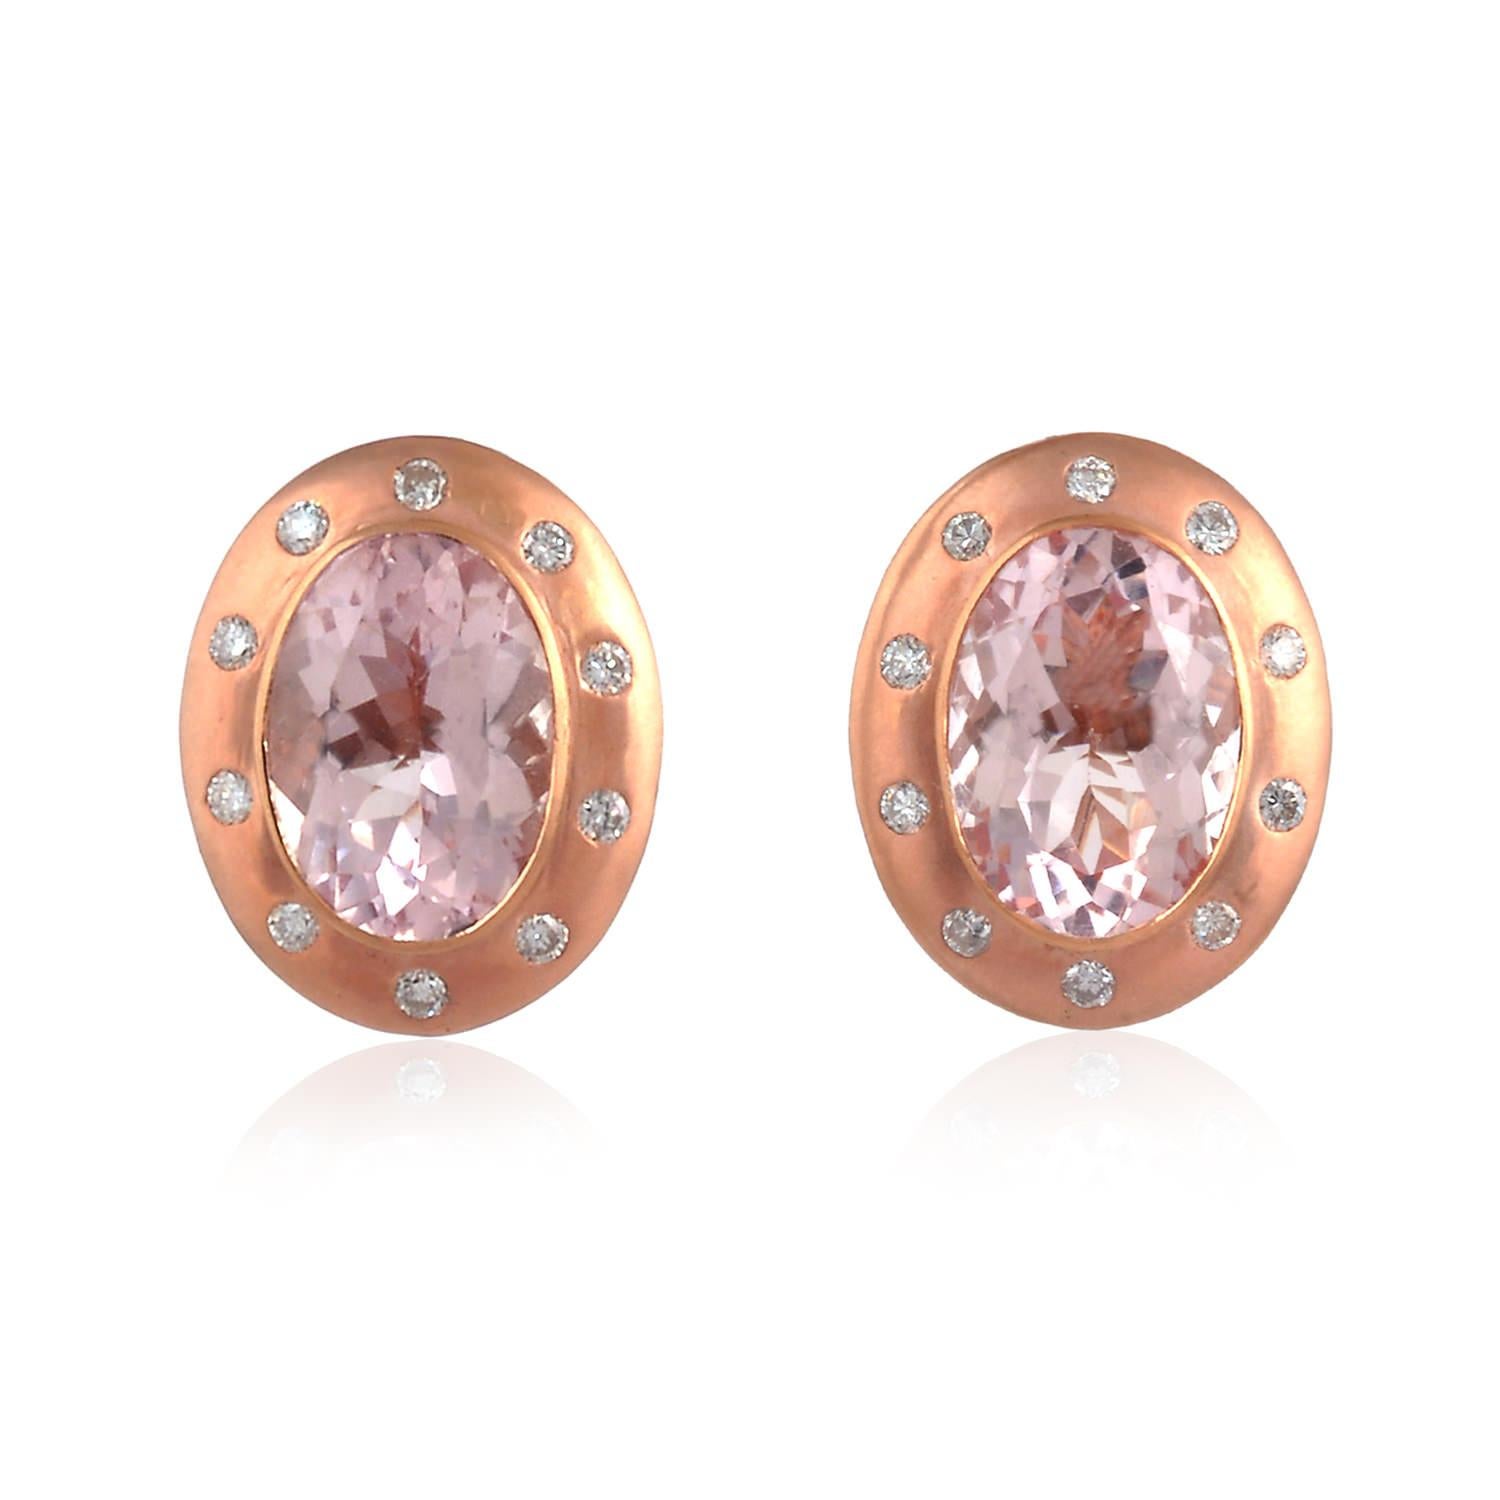 Oval Cut Morganite Stud Earring With Diamonds Made In 18k Rose Gold For Sale